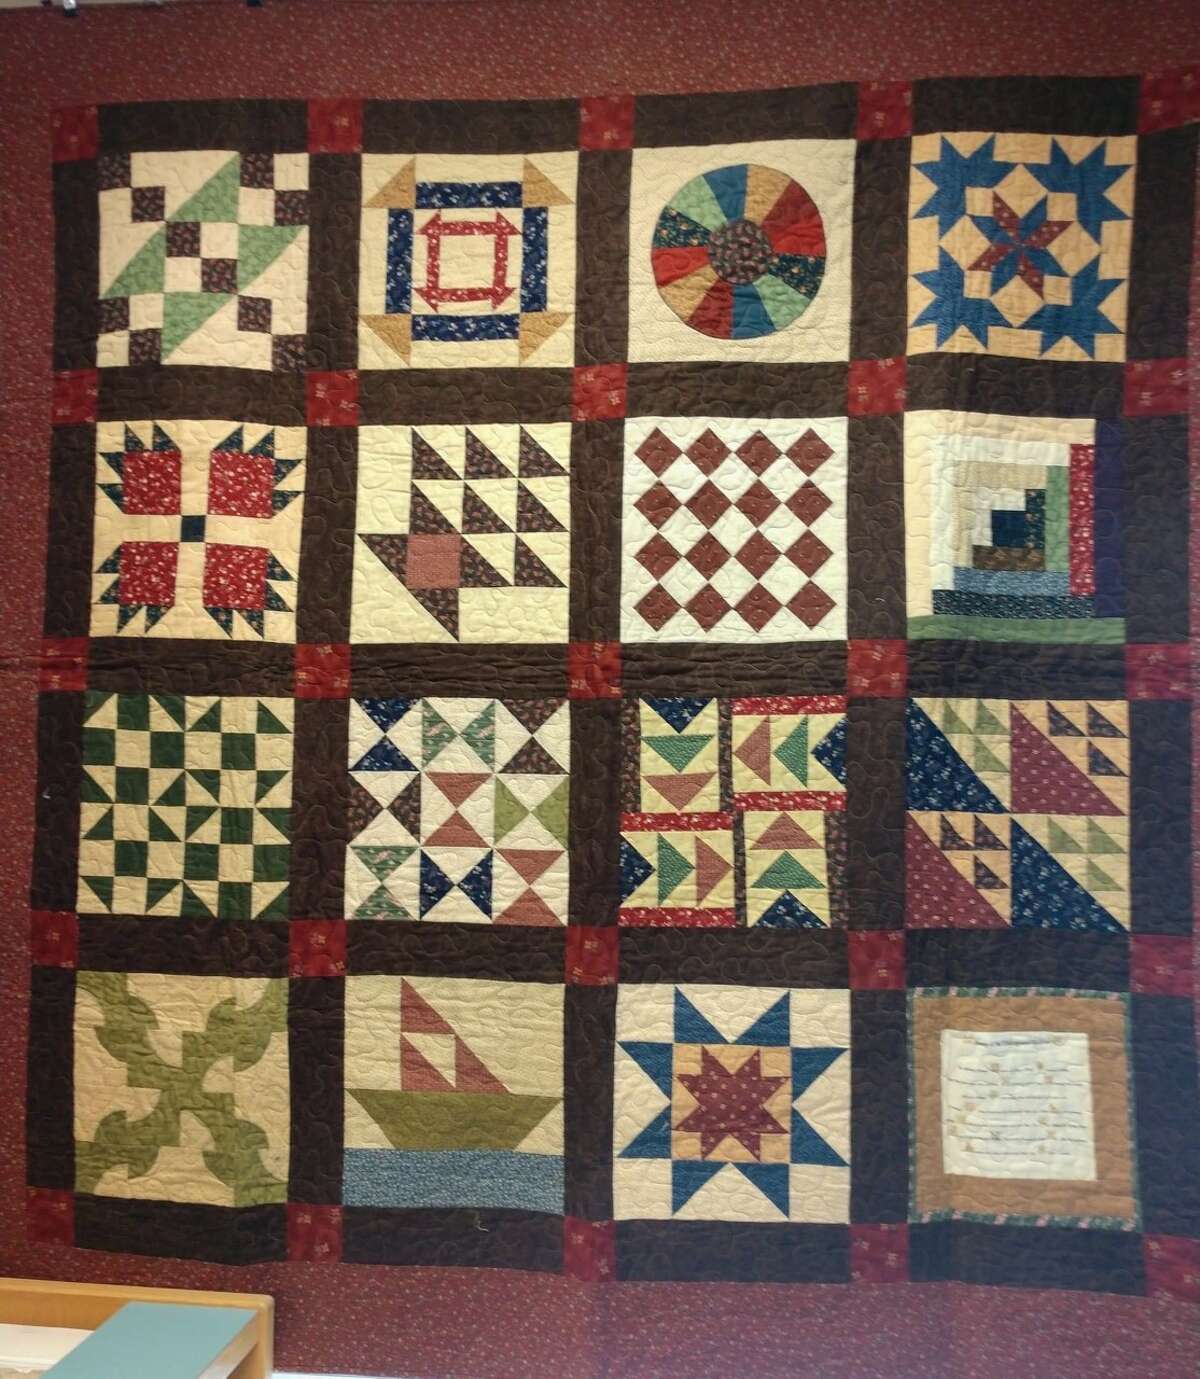 This quilt by Dee Witbeck depicting the "Underground Railroad," is the focal point of the Black History Month exhibit at Evart Public Library.